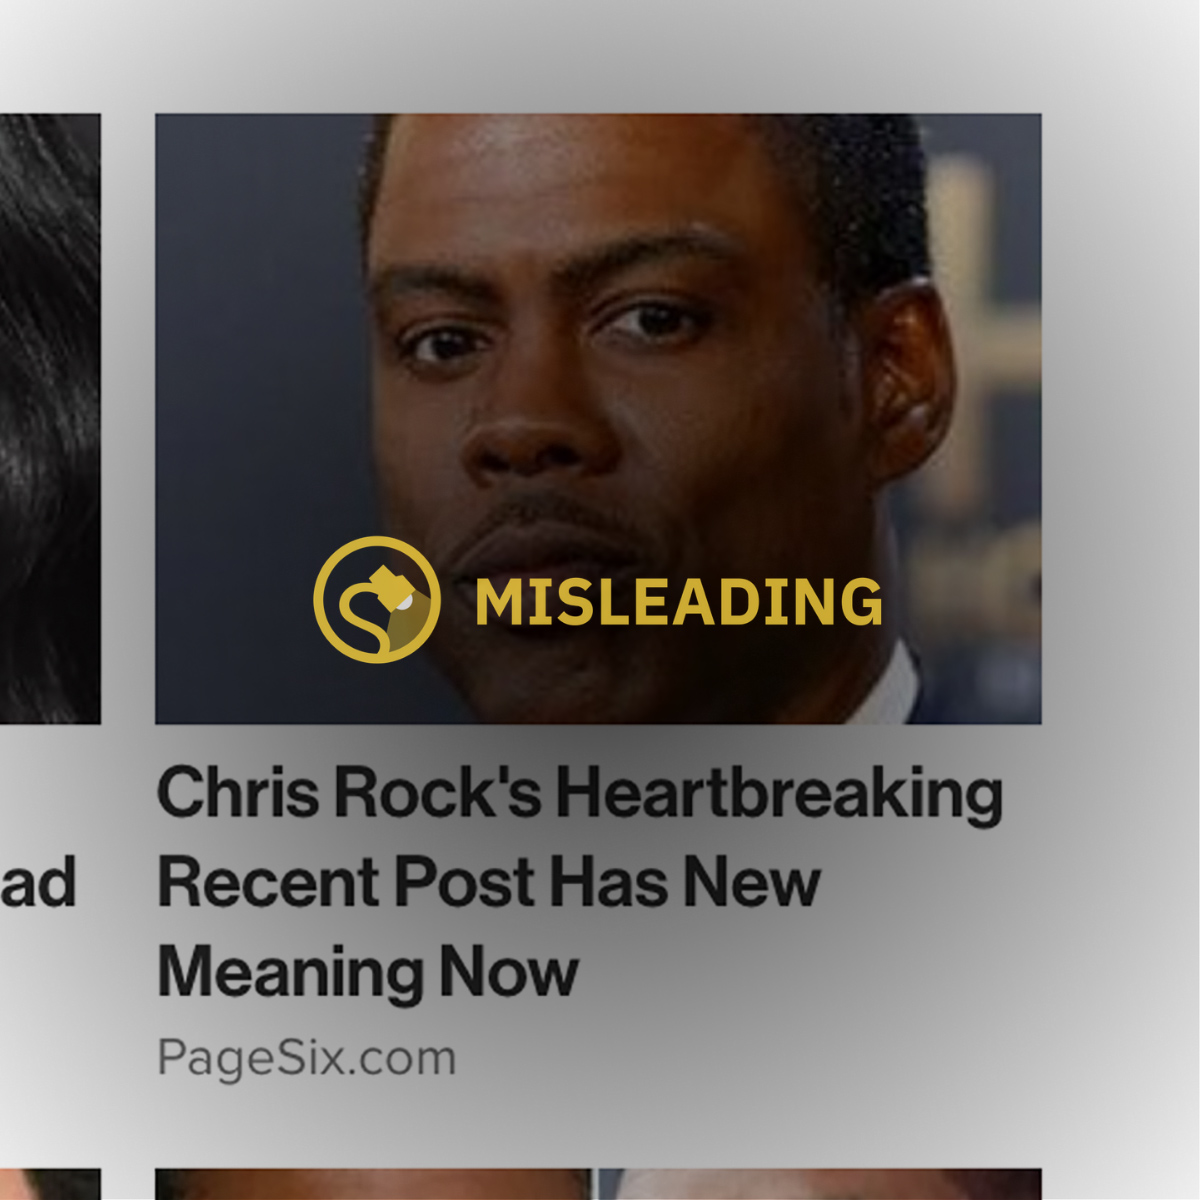 According to an online ad Chris Rock recently made a heartbreaking post on social media or elsewhere.